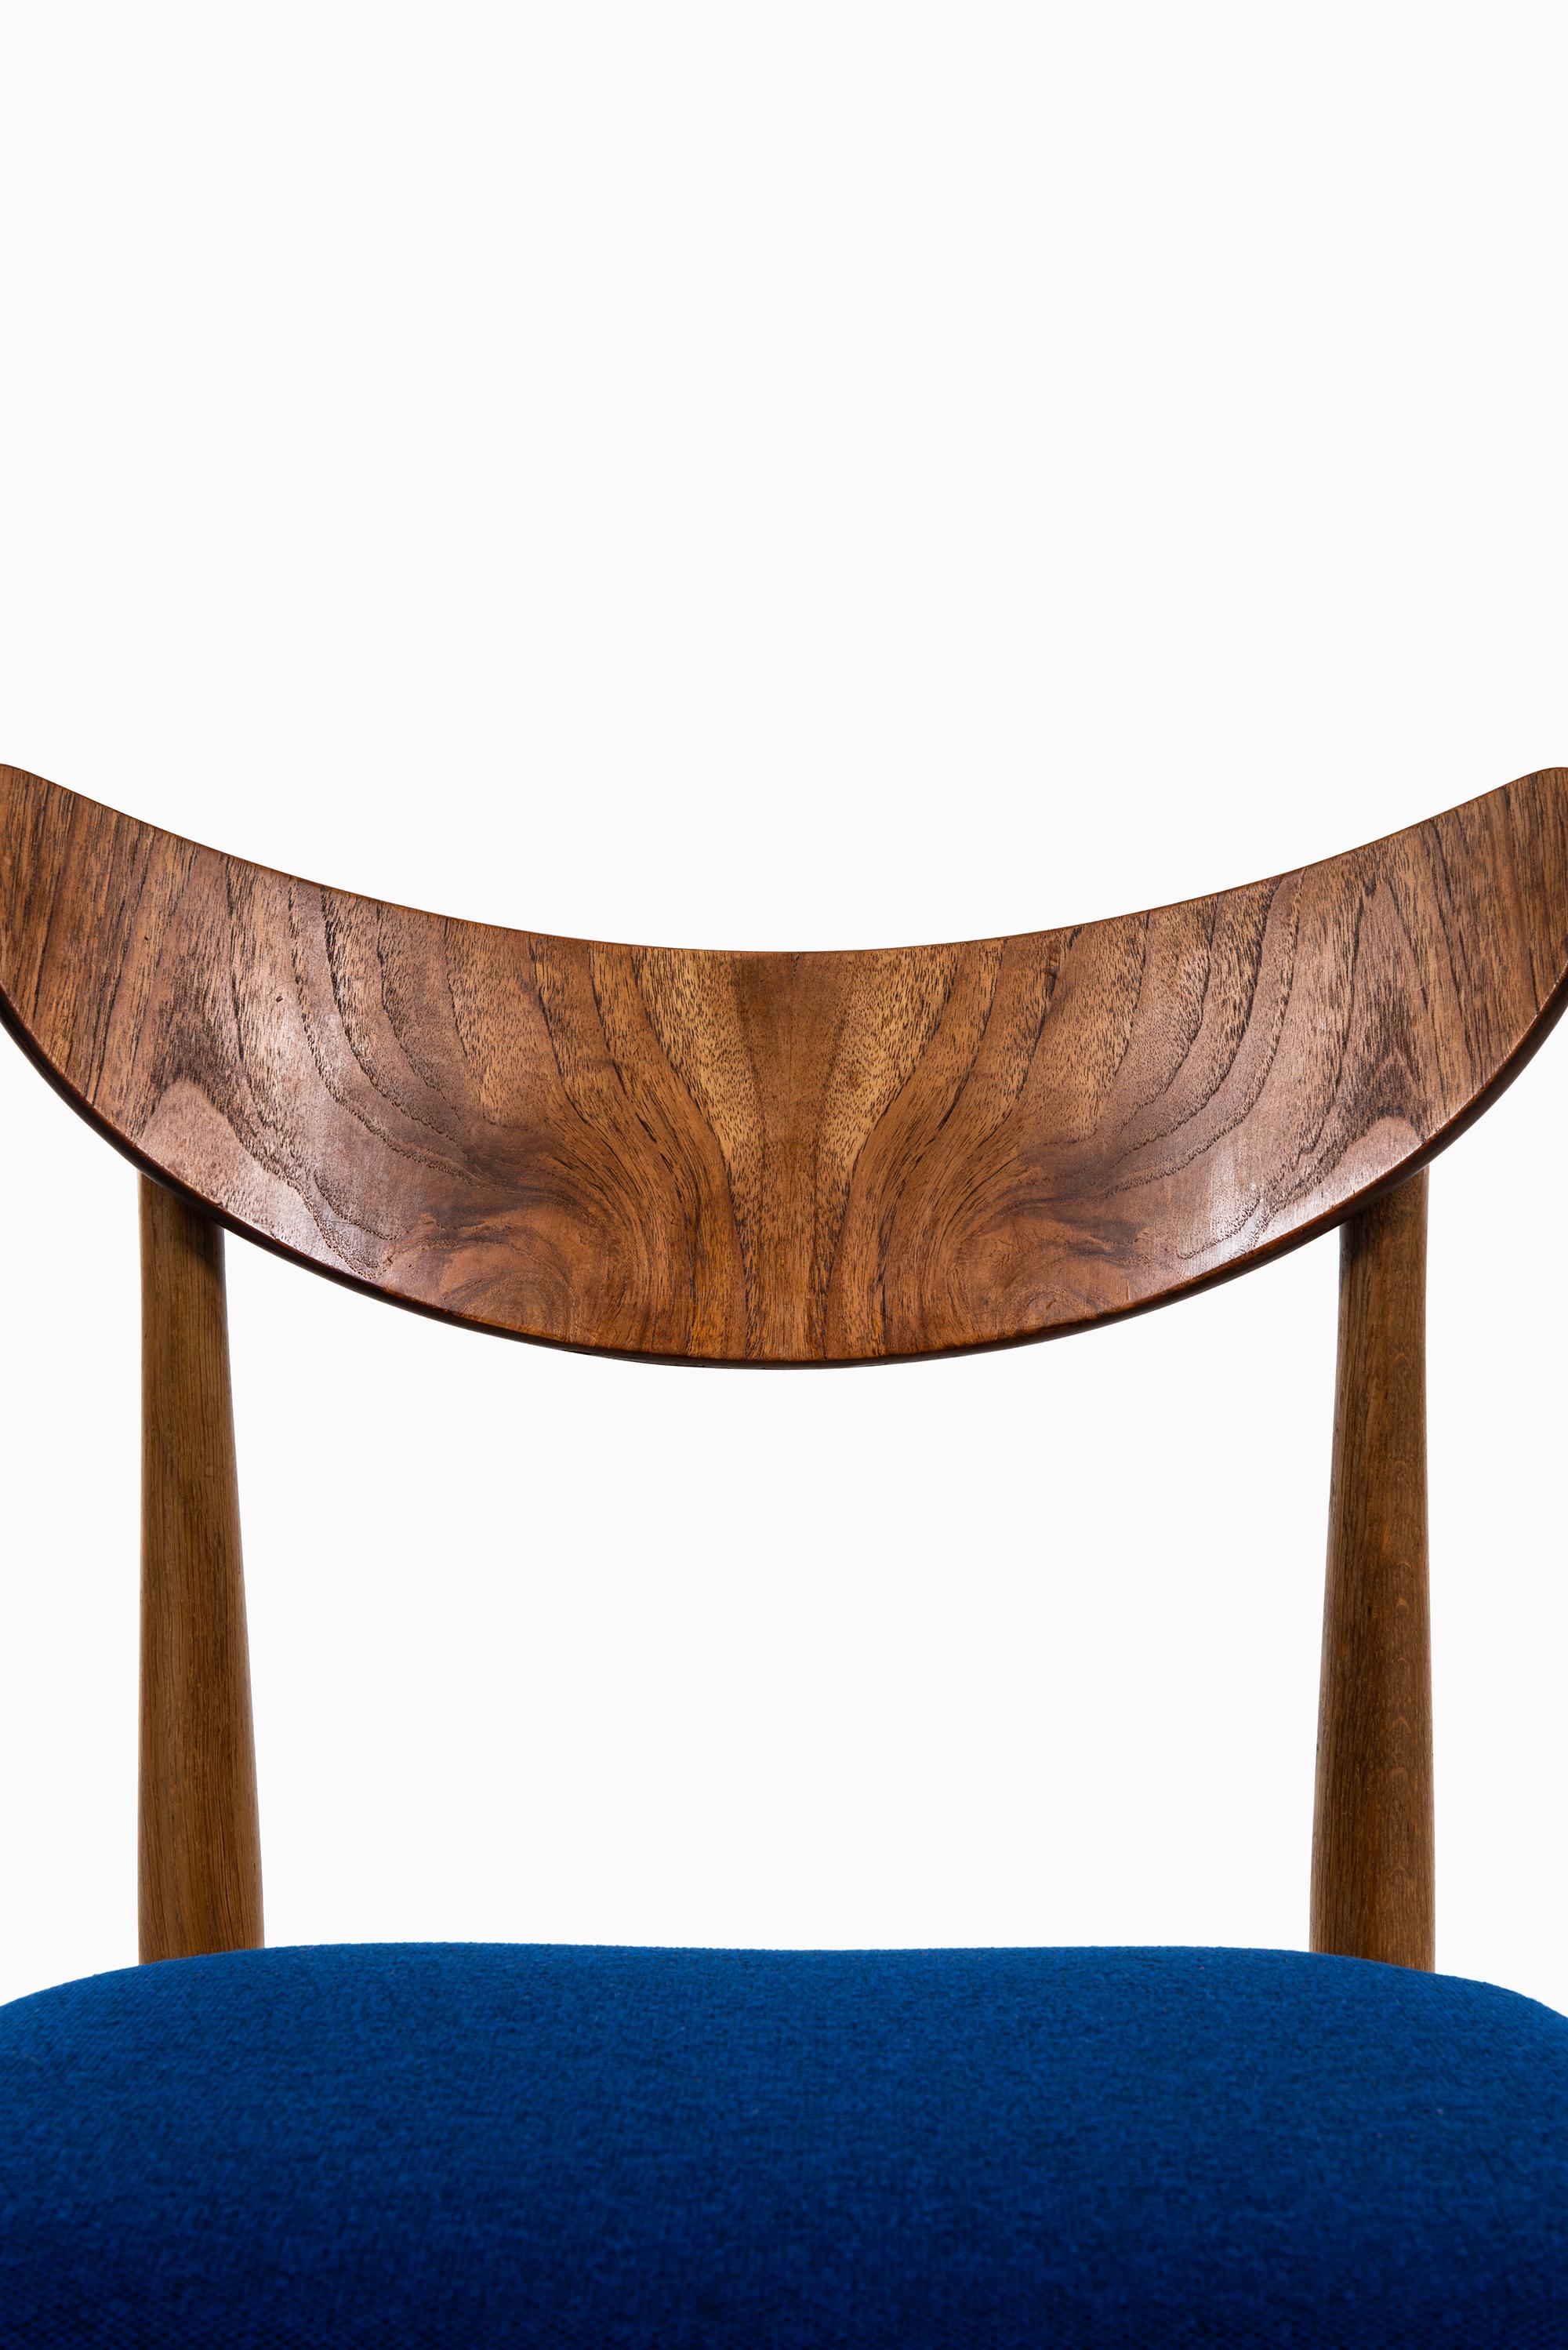 Scandinavian Modern Set of Six Dining Chairs in Oak, Teak and Blue Fabric Produced in Denmark For Sale